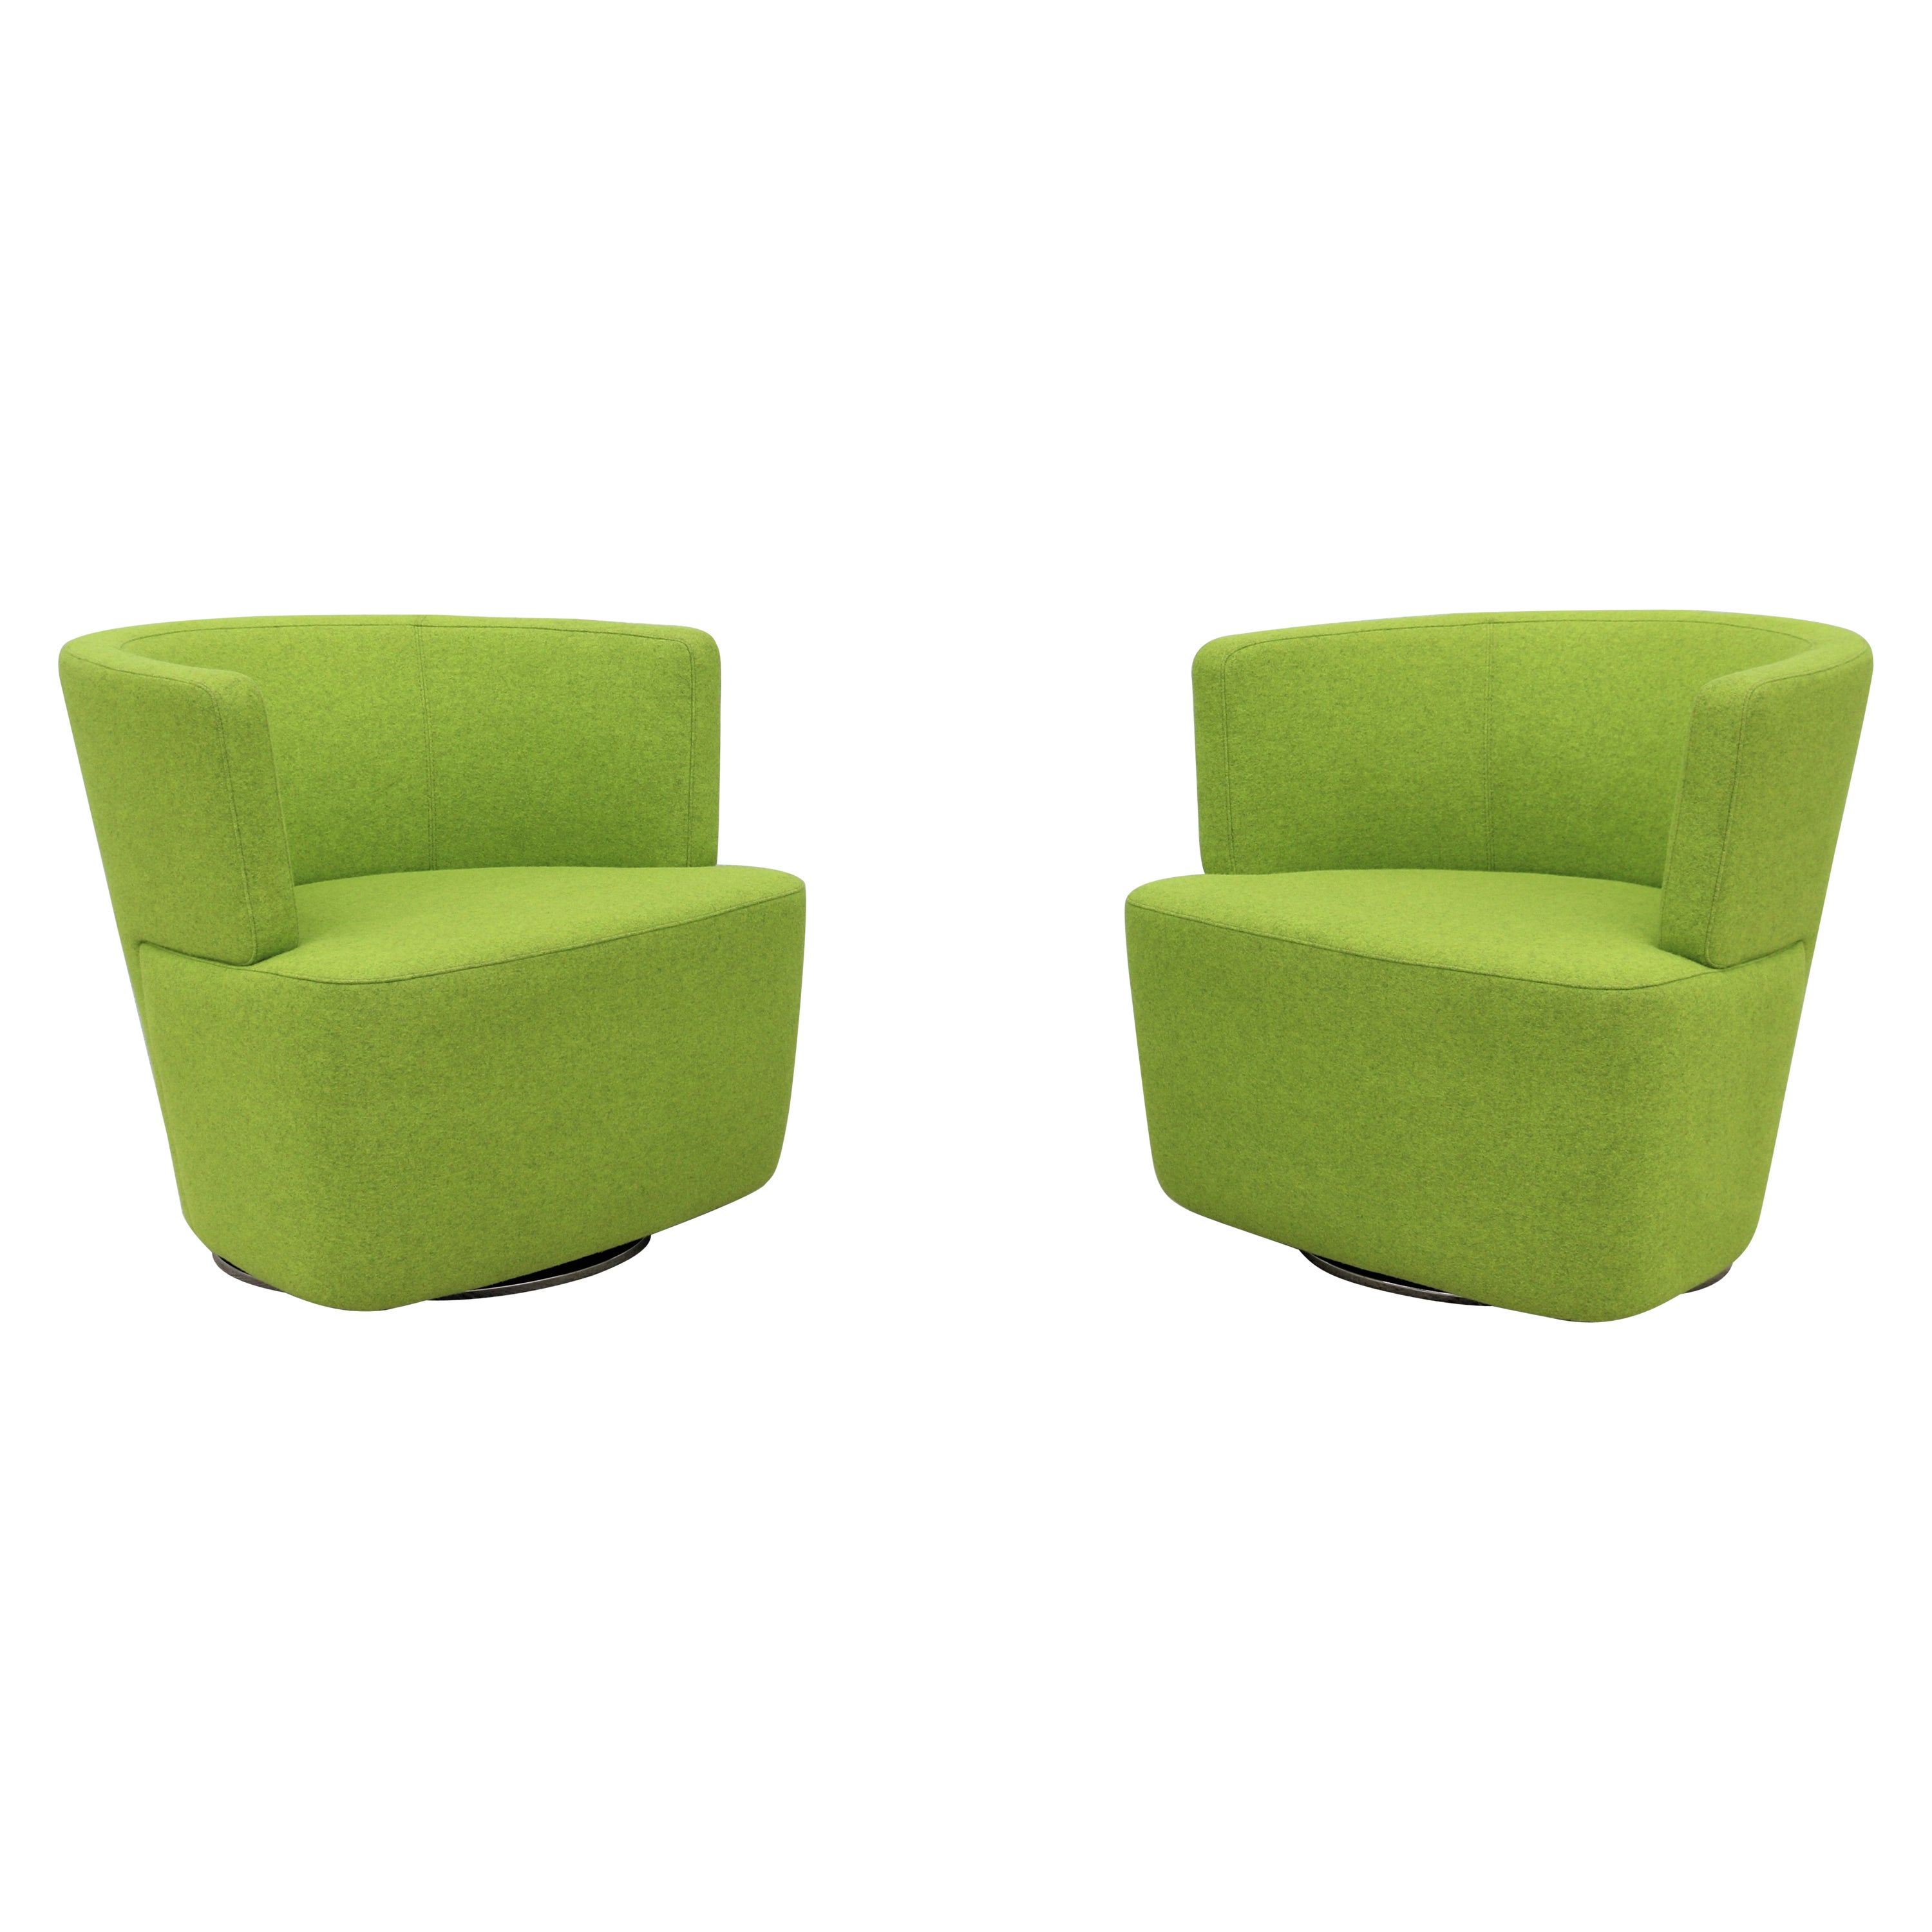 Modern Eoos for Coalesse Joel Green Swivel Lounge Chairs by Walter Knoll, a Pair